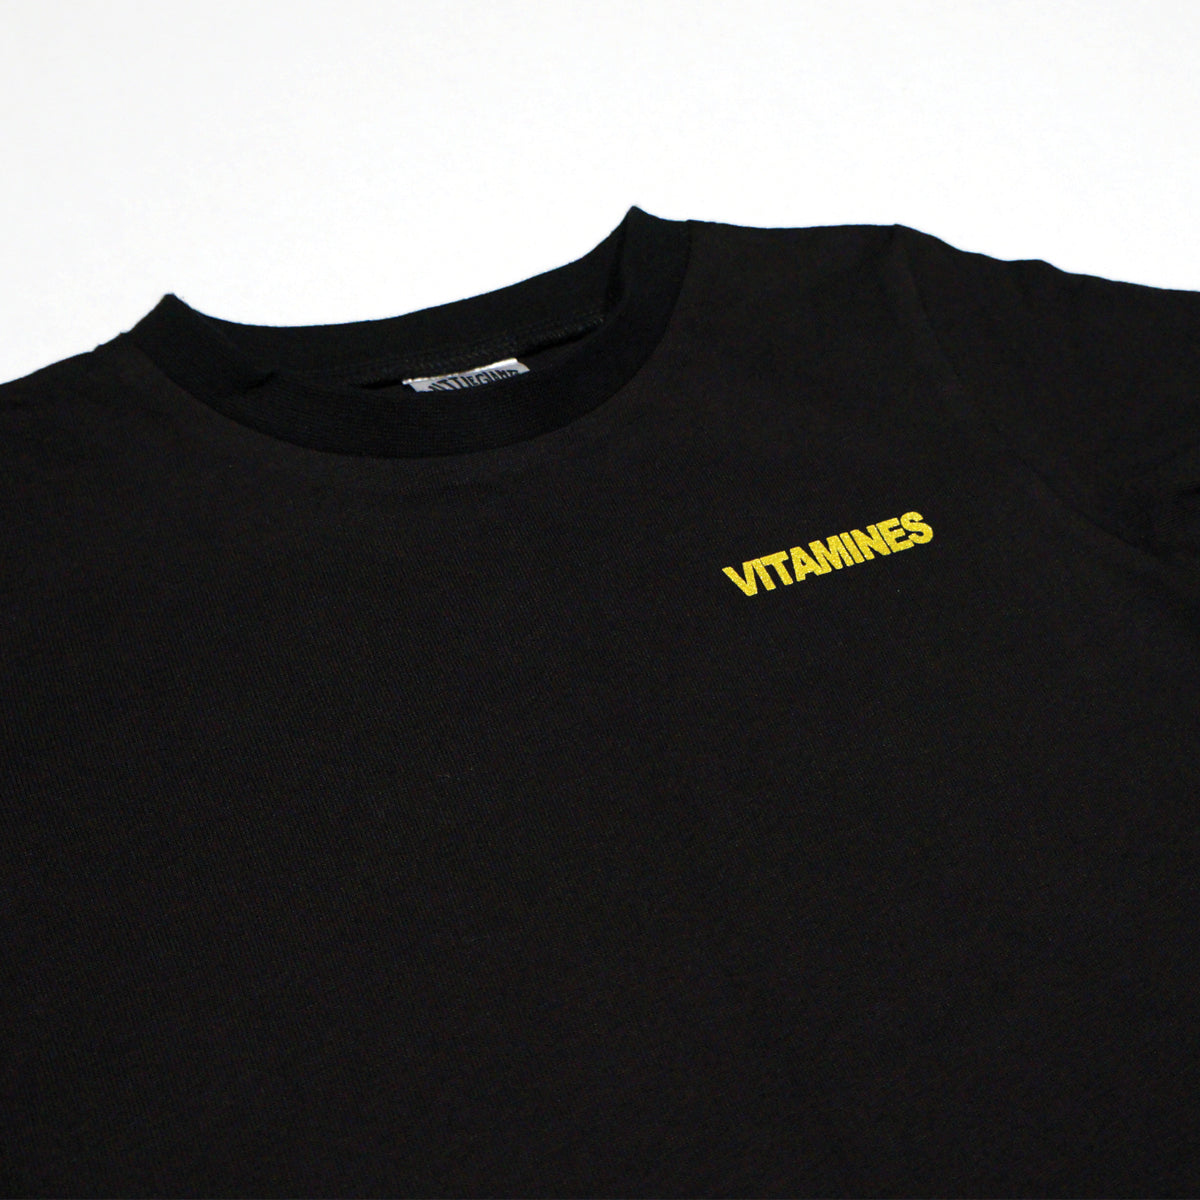 Our Entry Level Shirt (Black)